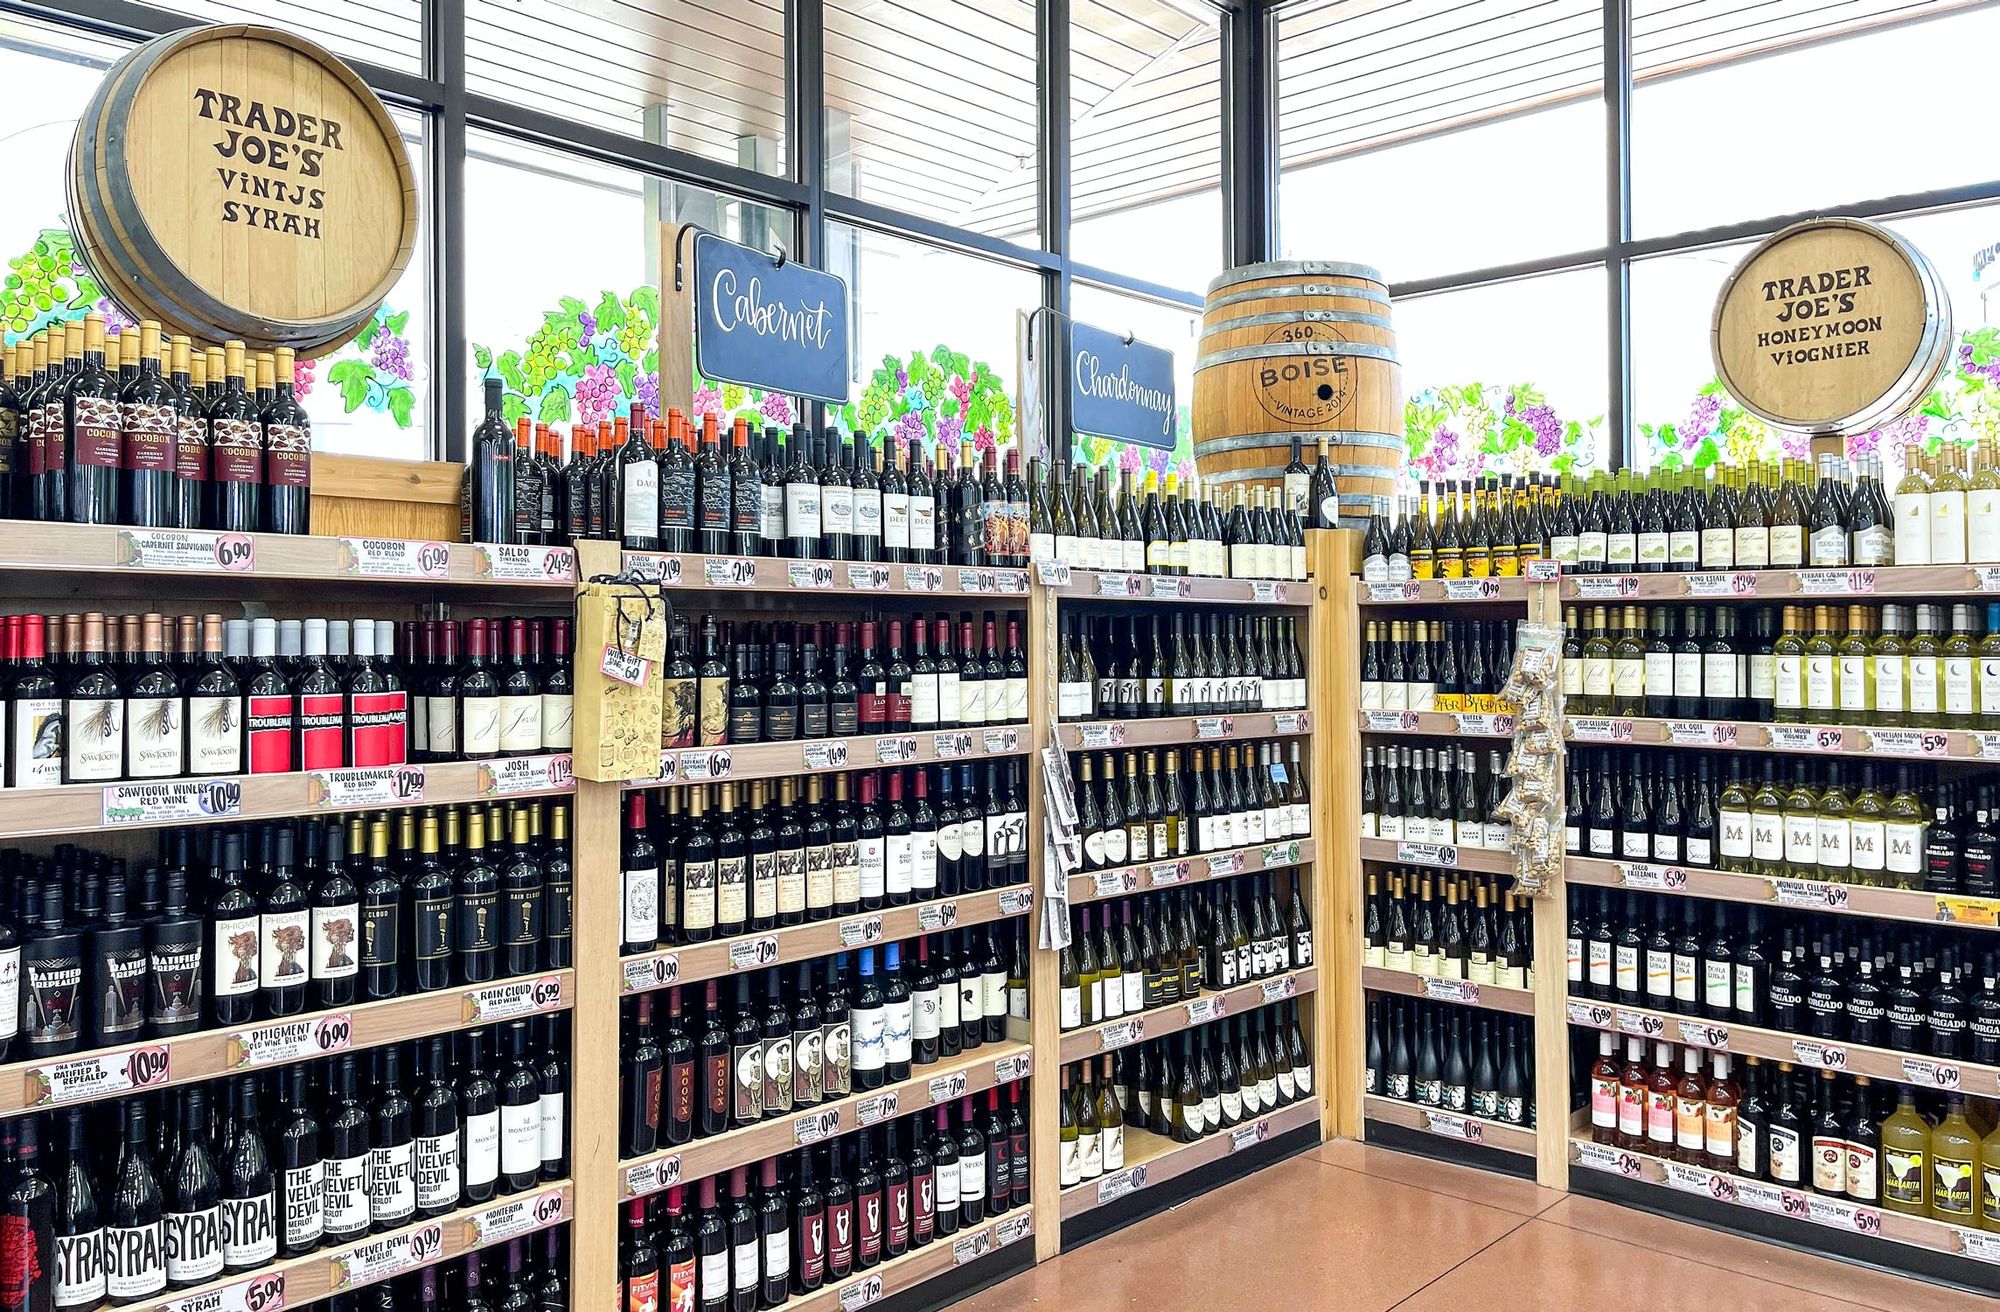 Trader Joe's Wine Reviews: A Comprehensive Guide to the Best and Worst Wines